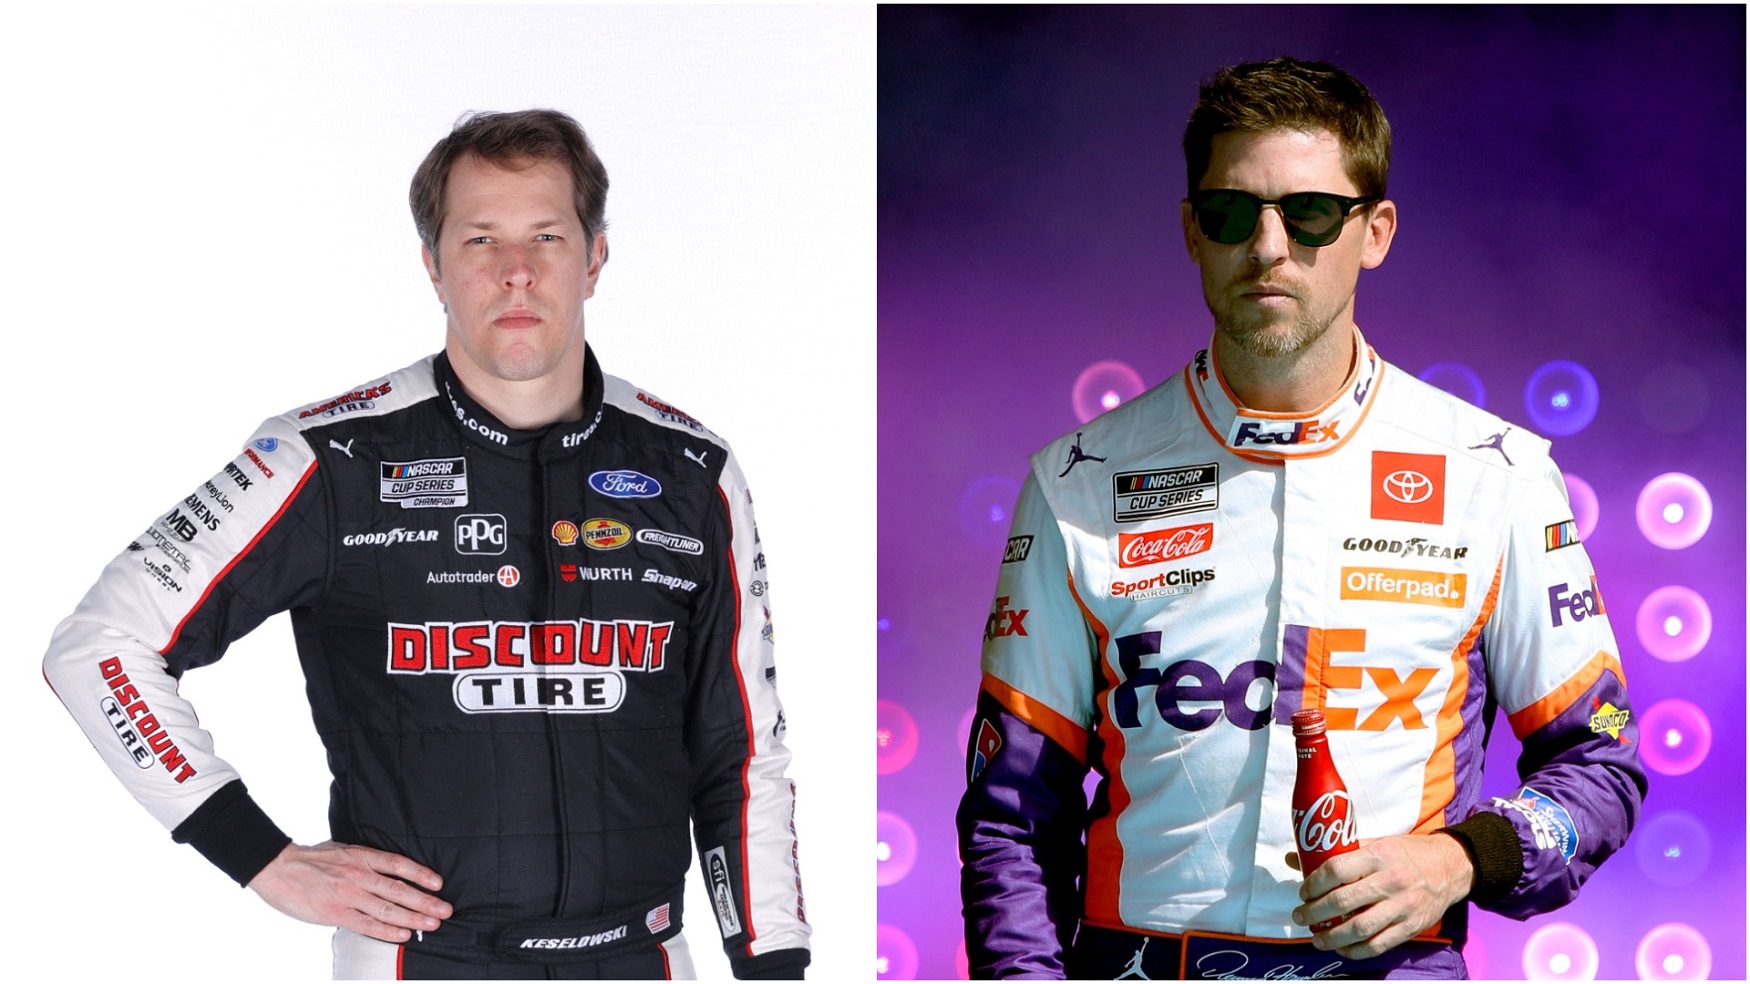 Brad Keselowski and Denny Hamlin have feuded in the past over incidents in NASCAR Cup and Xfinity races. Now, however, Hamlin suggests Roush Fenway made a wise move by bringing Keselowski in as a co-owner.